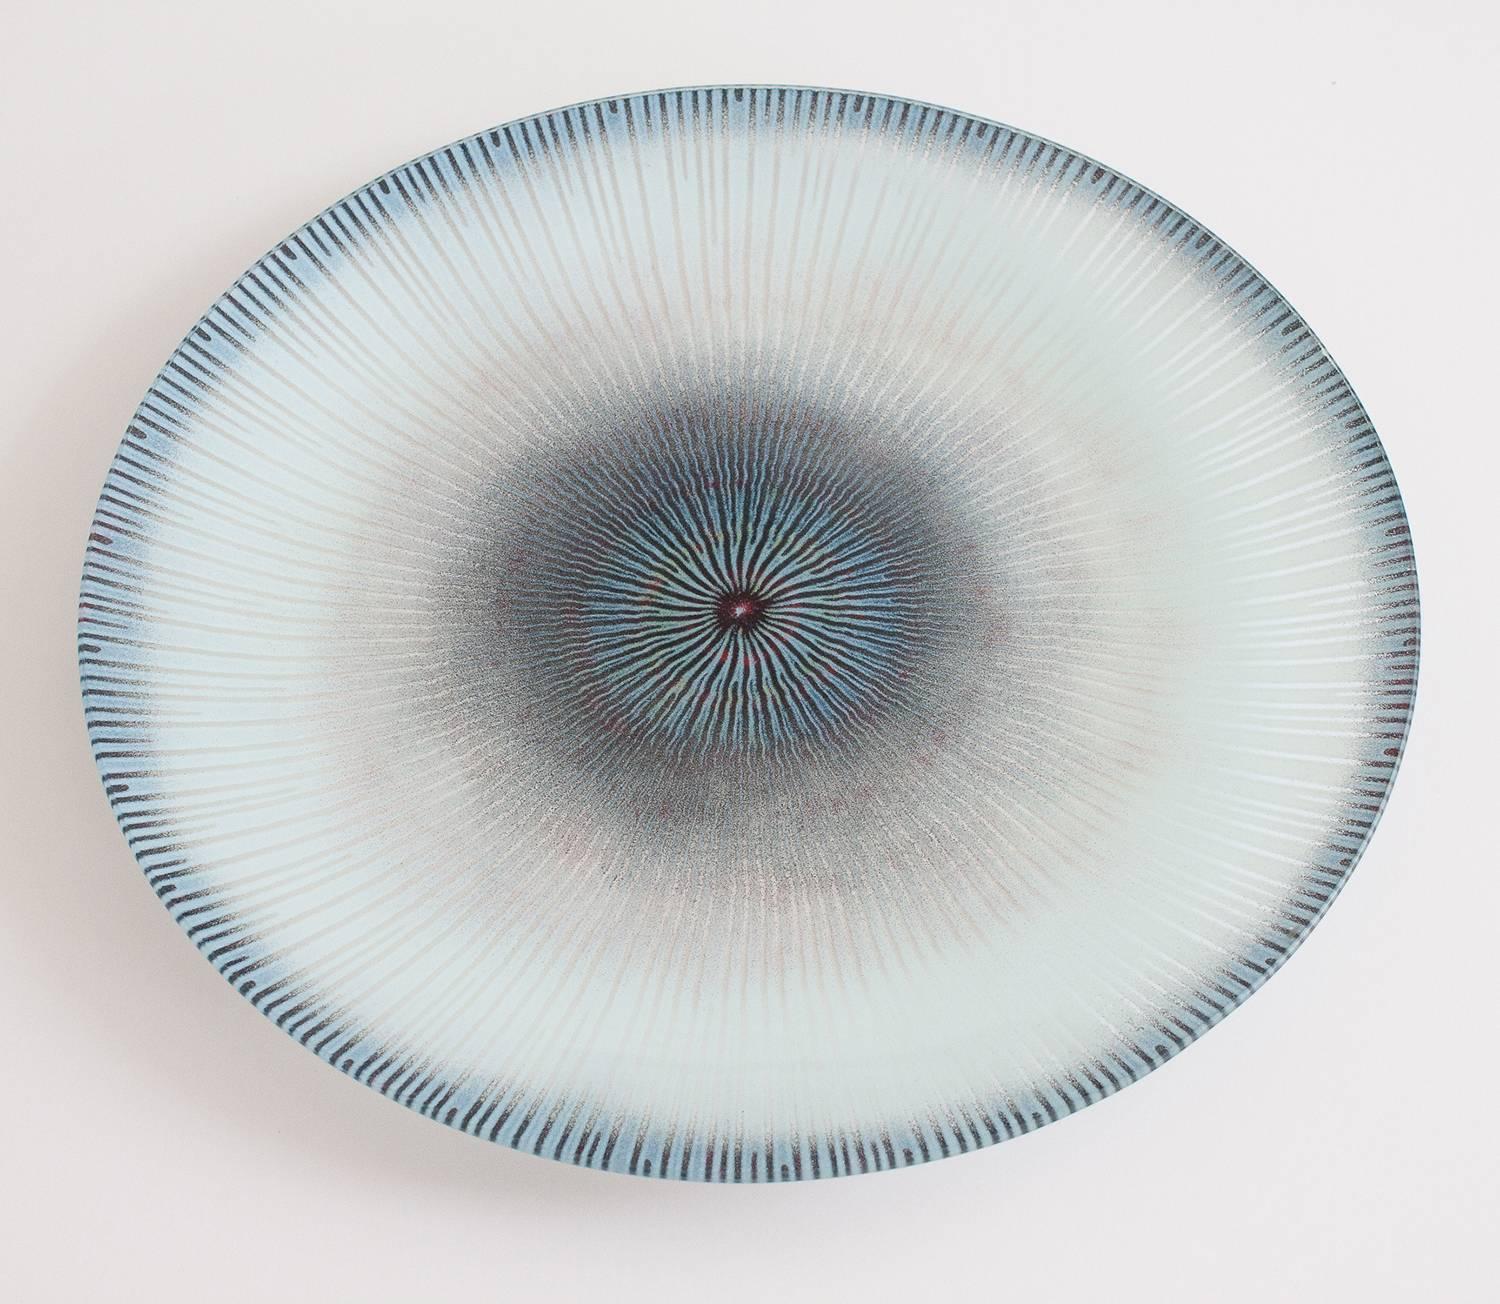 Maurice Heaton (1900-1990) enameled glass charger with sunburst design in pale blues and a touch of red. Signed M.H. In 1947, Heaton invented a process of fusing crystals of enamel to glass surfaces, allowing for rich experimentation for